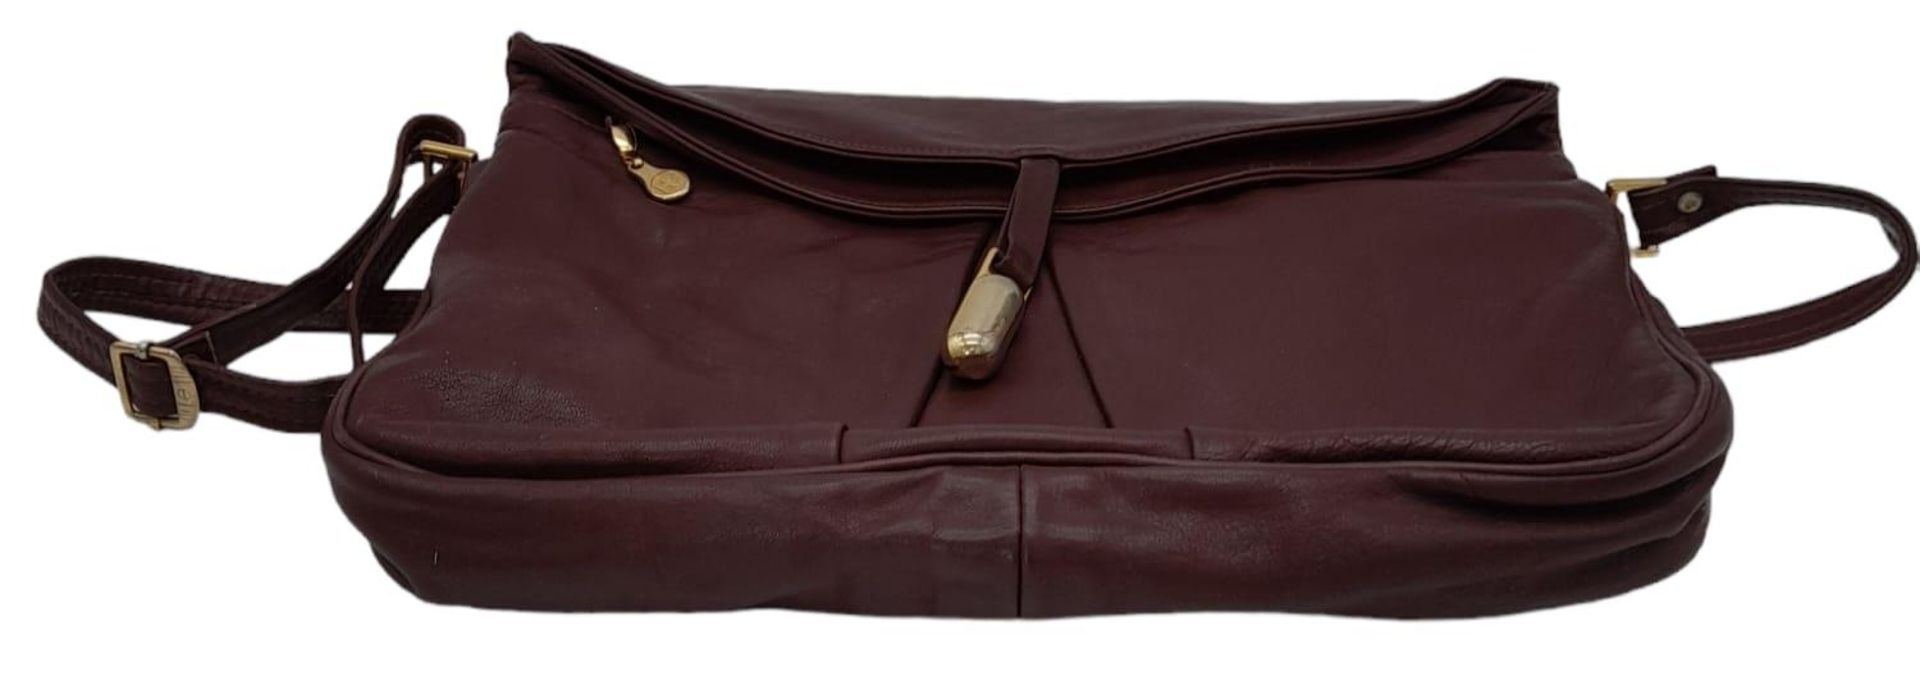 A Vintage Burgundy Leather Handbag. Burgundy leather with large exterior pocket. Gilded touches. - Image 4 of 9